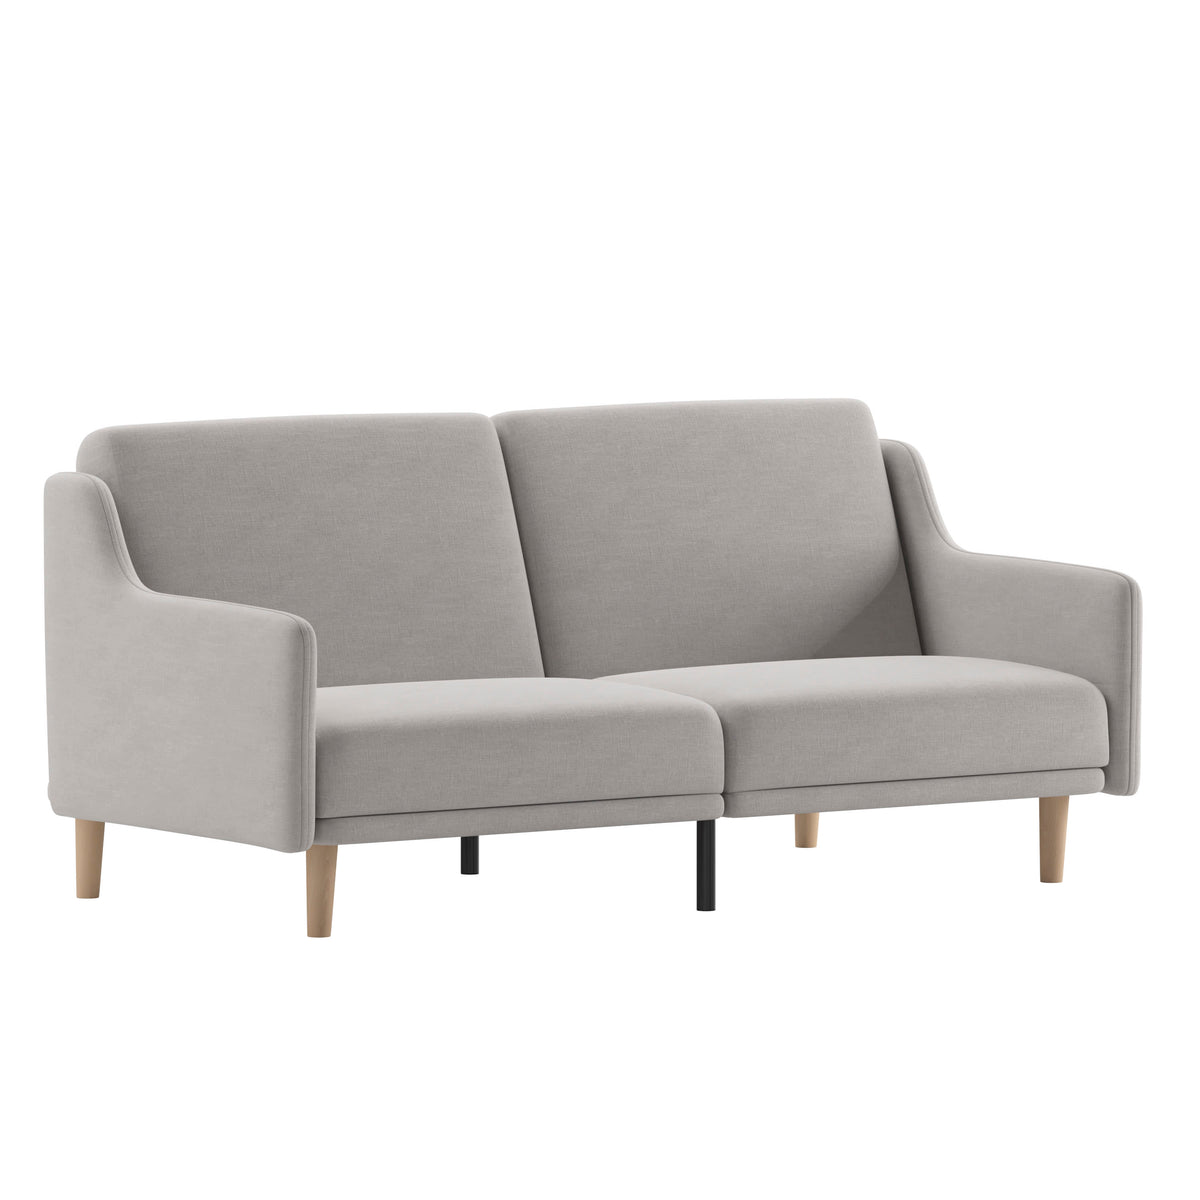 Gray |#| Split Back Futon Sofa with Curved Arms and Solid Wood Legs- Gray Faux Linen